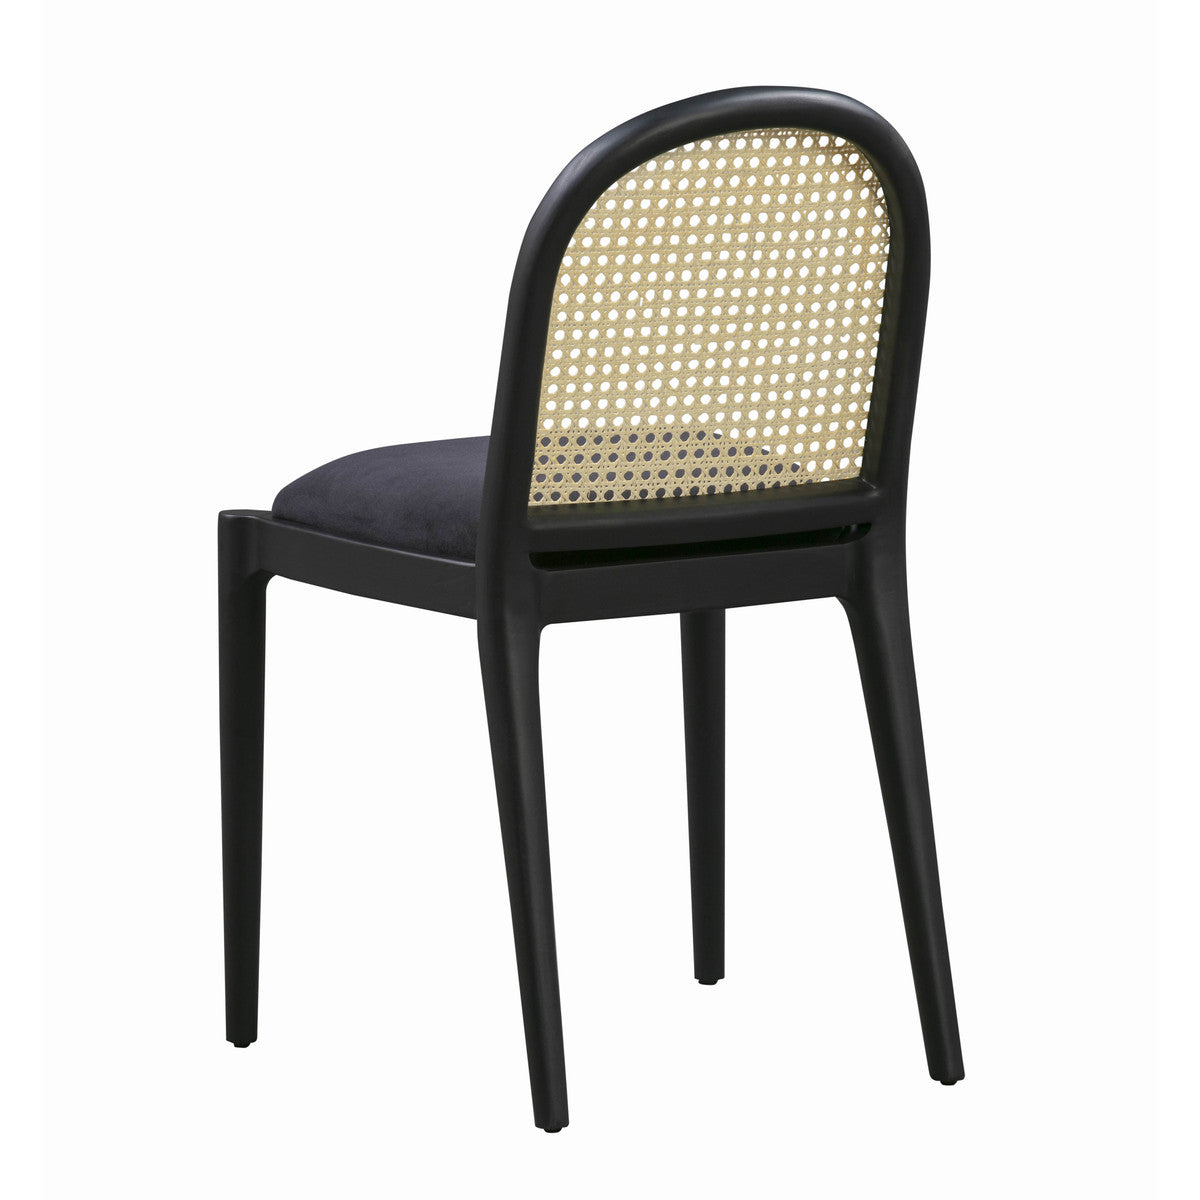 Deco Cane Dining Chair